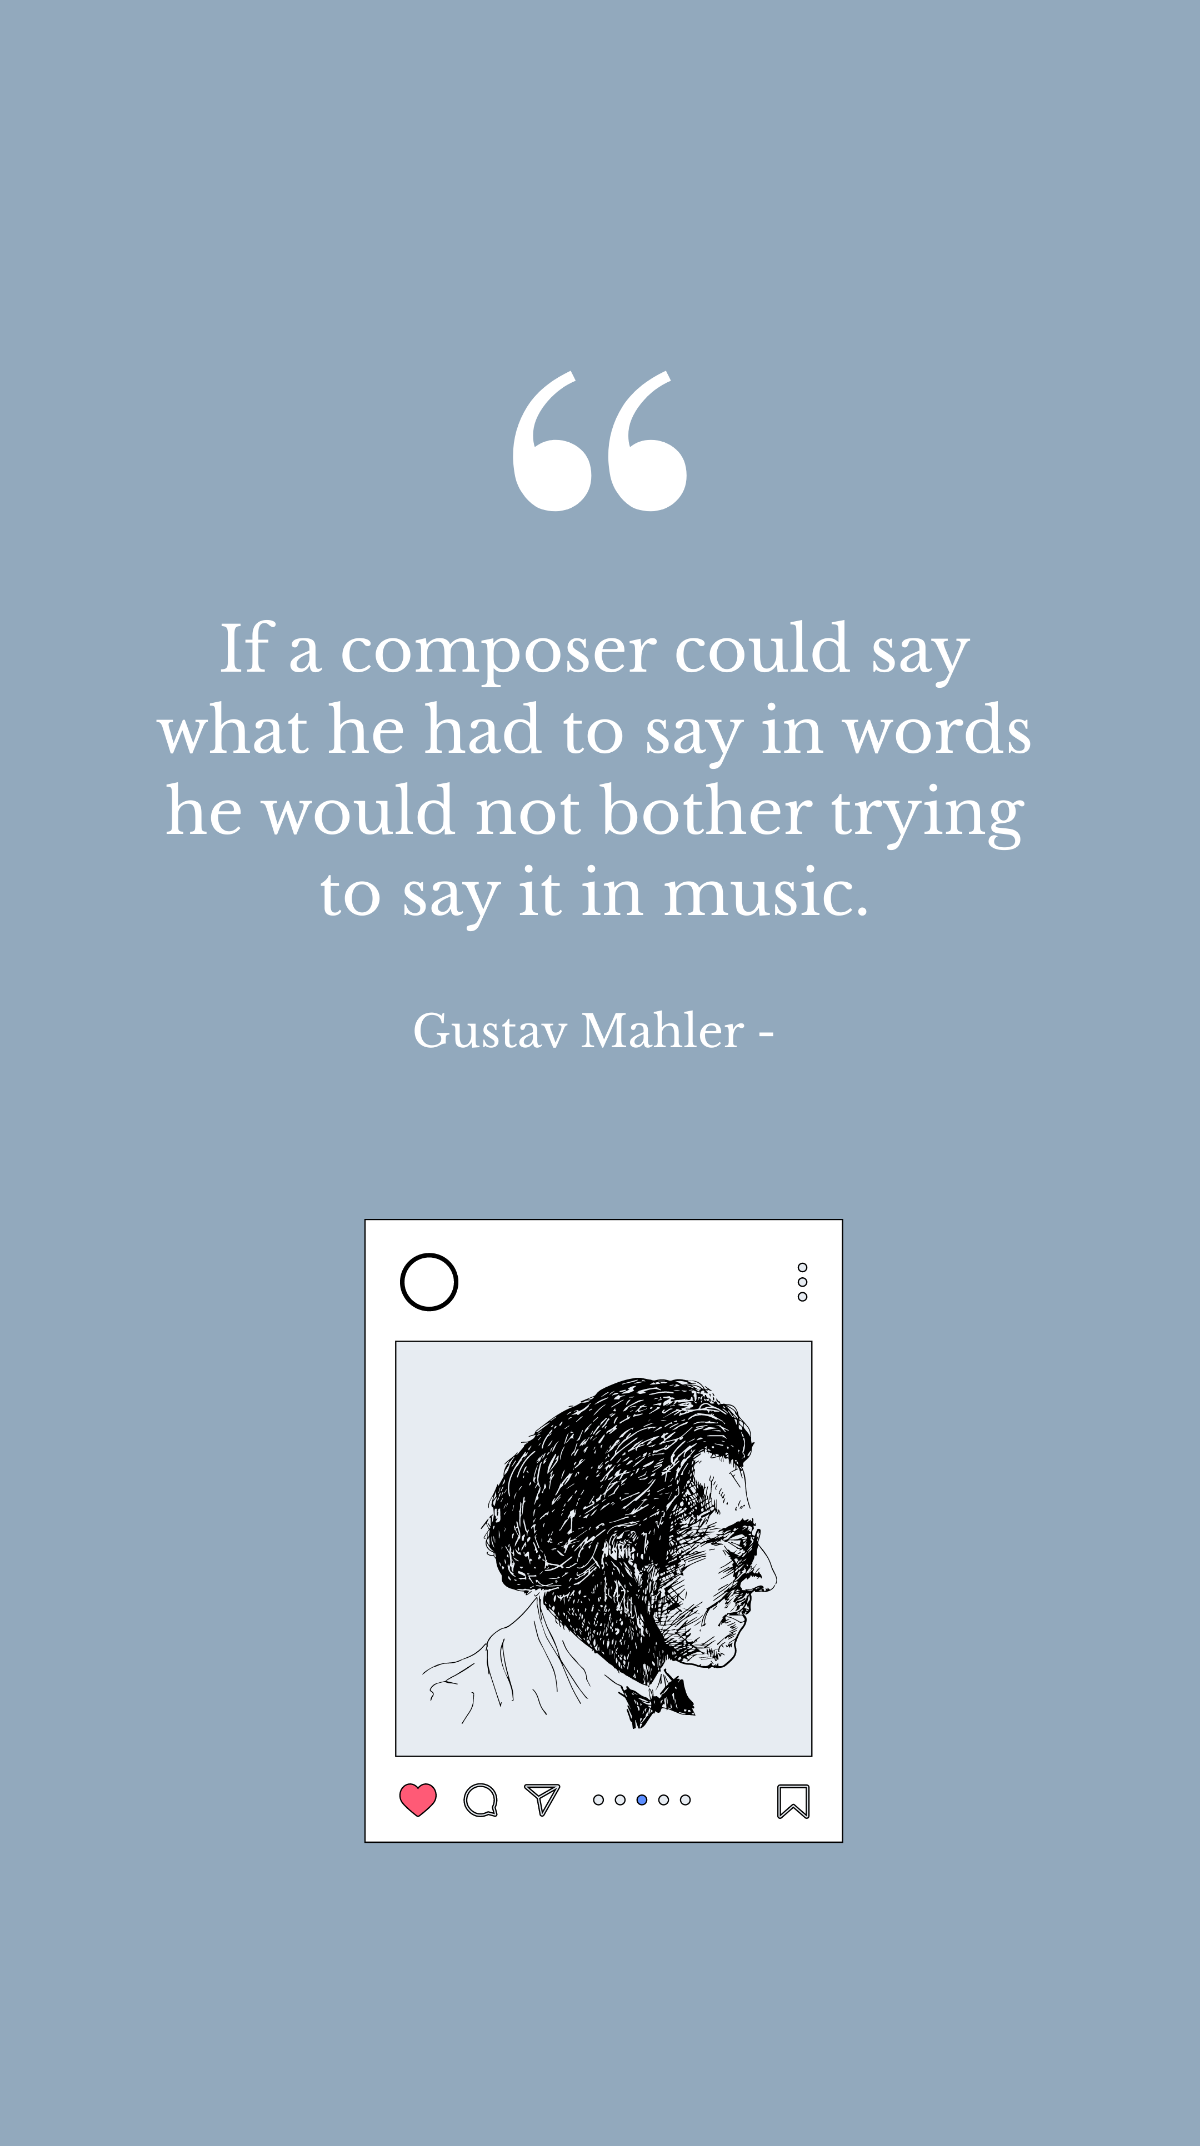 Gustav Mahler - If a composer could say what he had to say in words he would not bother trying to say it in music. Template